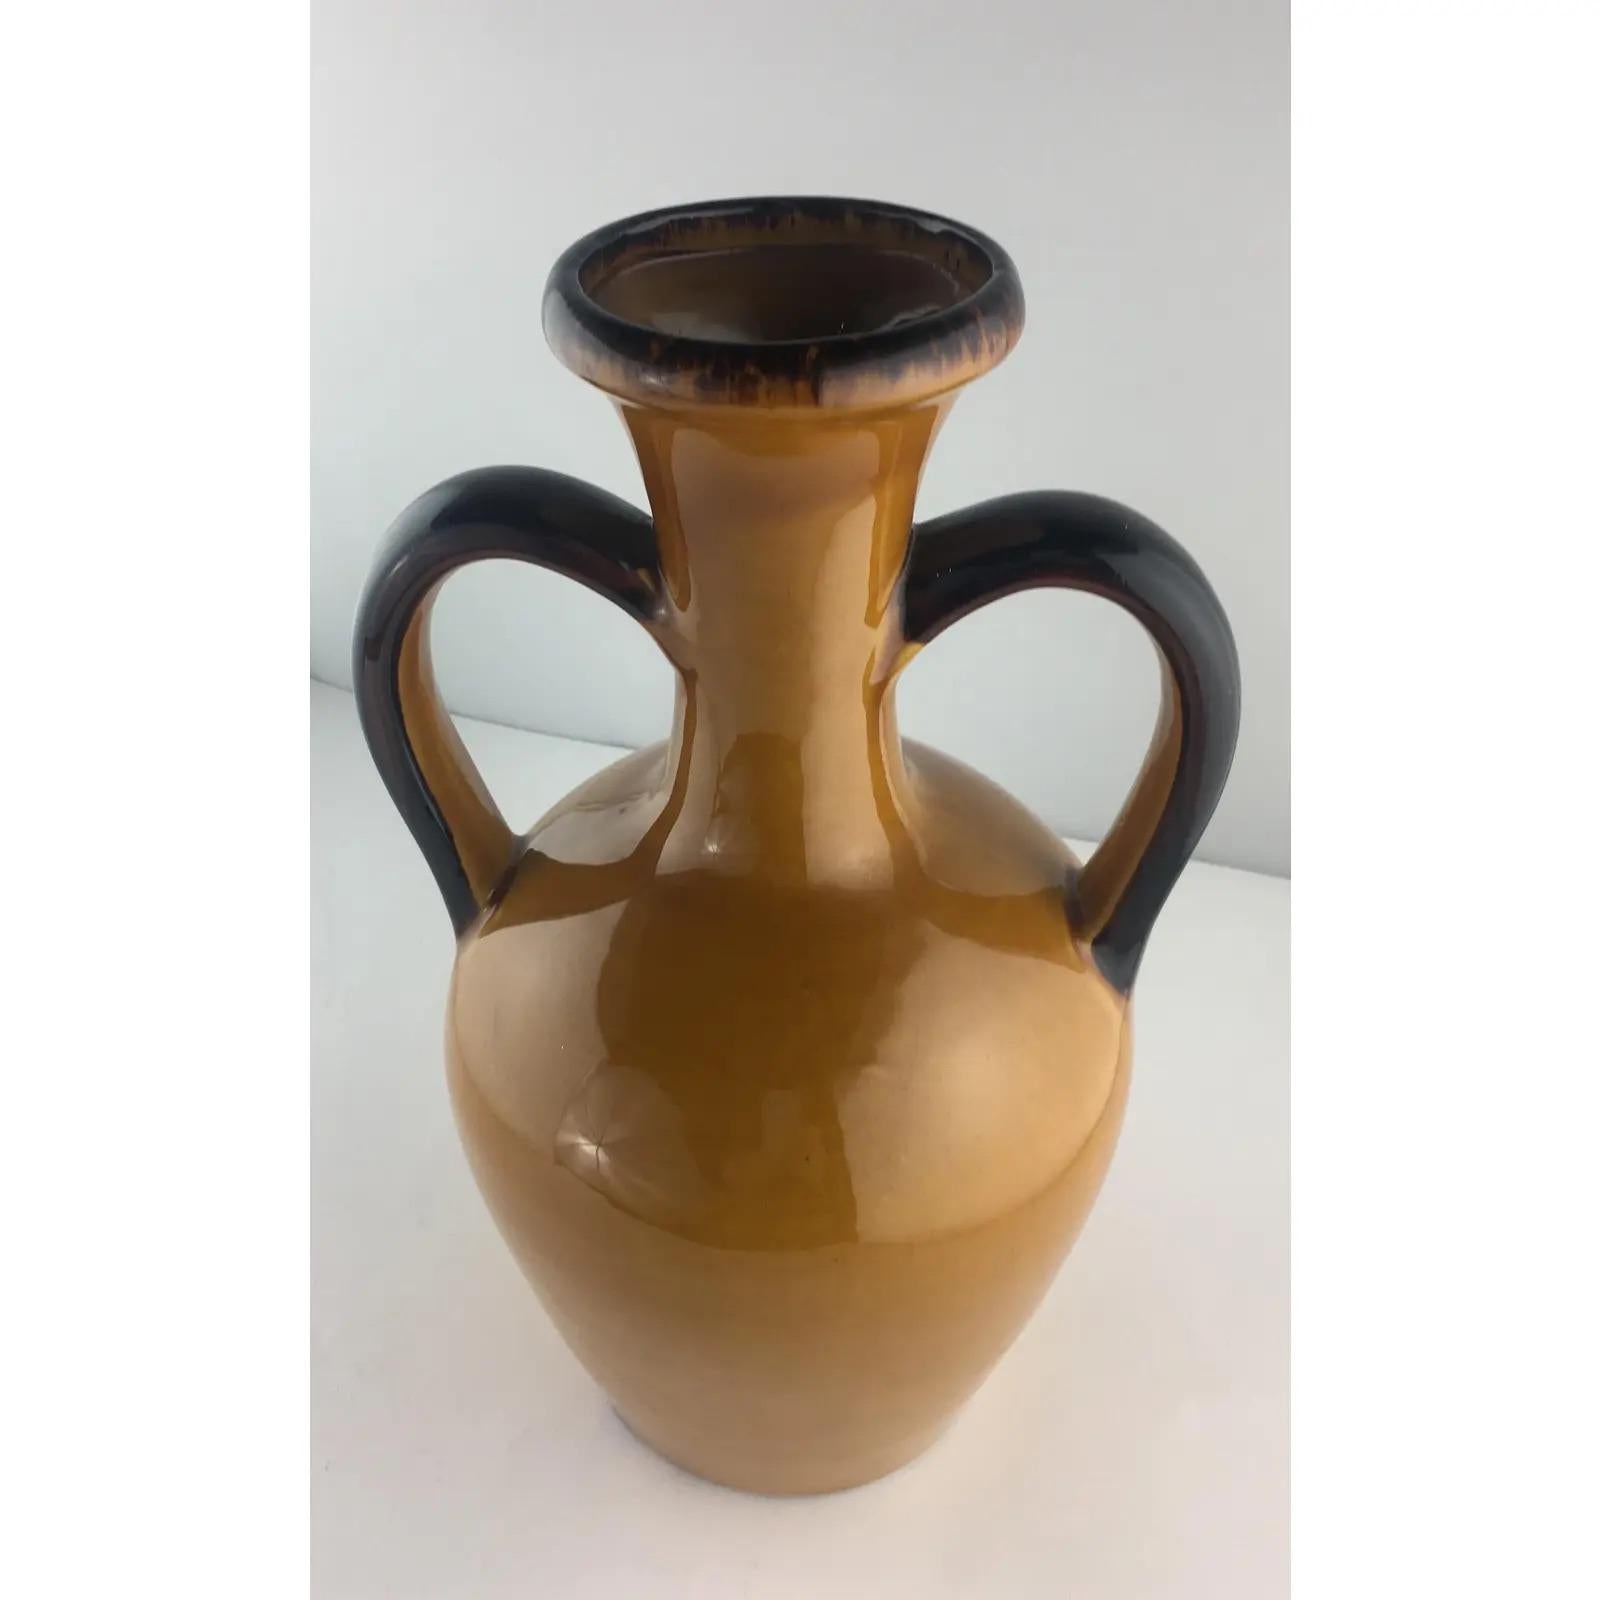 A fine 1960's French ceramic handled vase from Vallauris. 

Rare model with a beautiful quality work by Poet Laval Lézignan inspired by Greek amphora vases.

This is a perfect example of hand-crafted and glazed pottery from the French Riviera